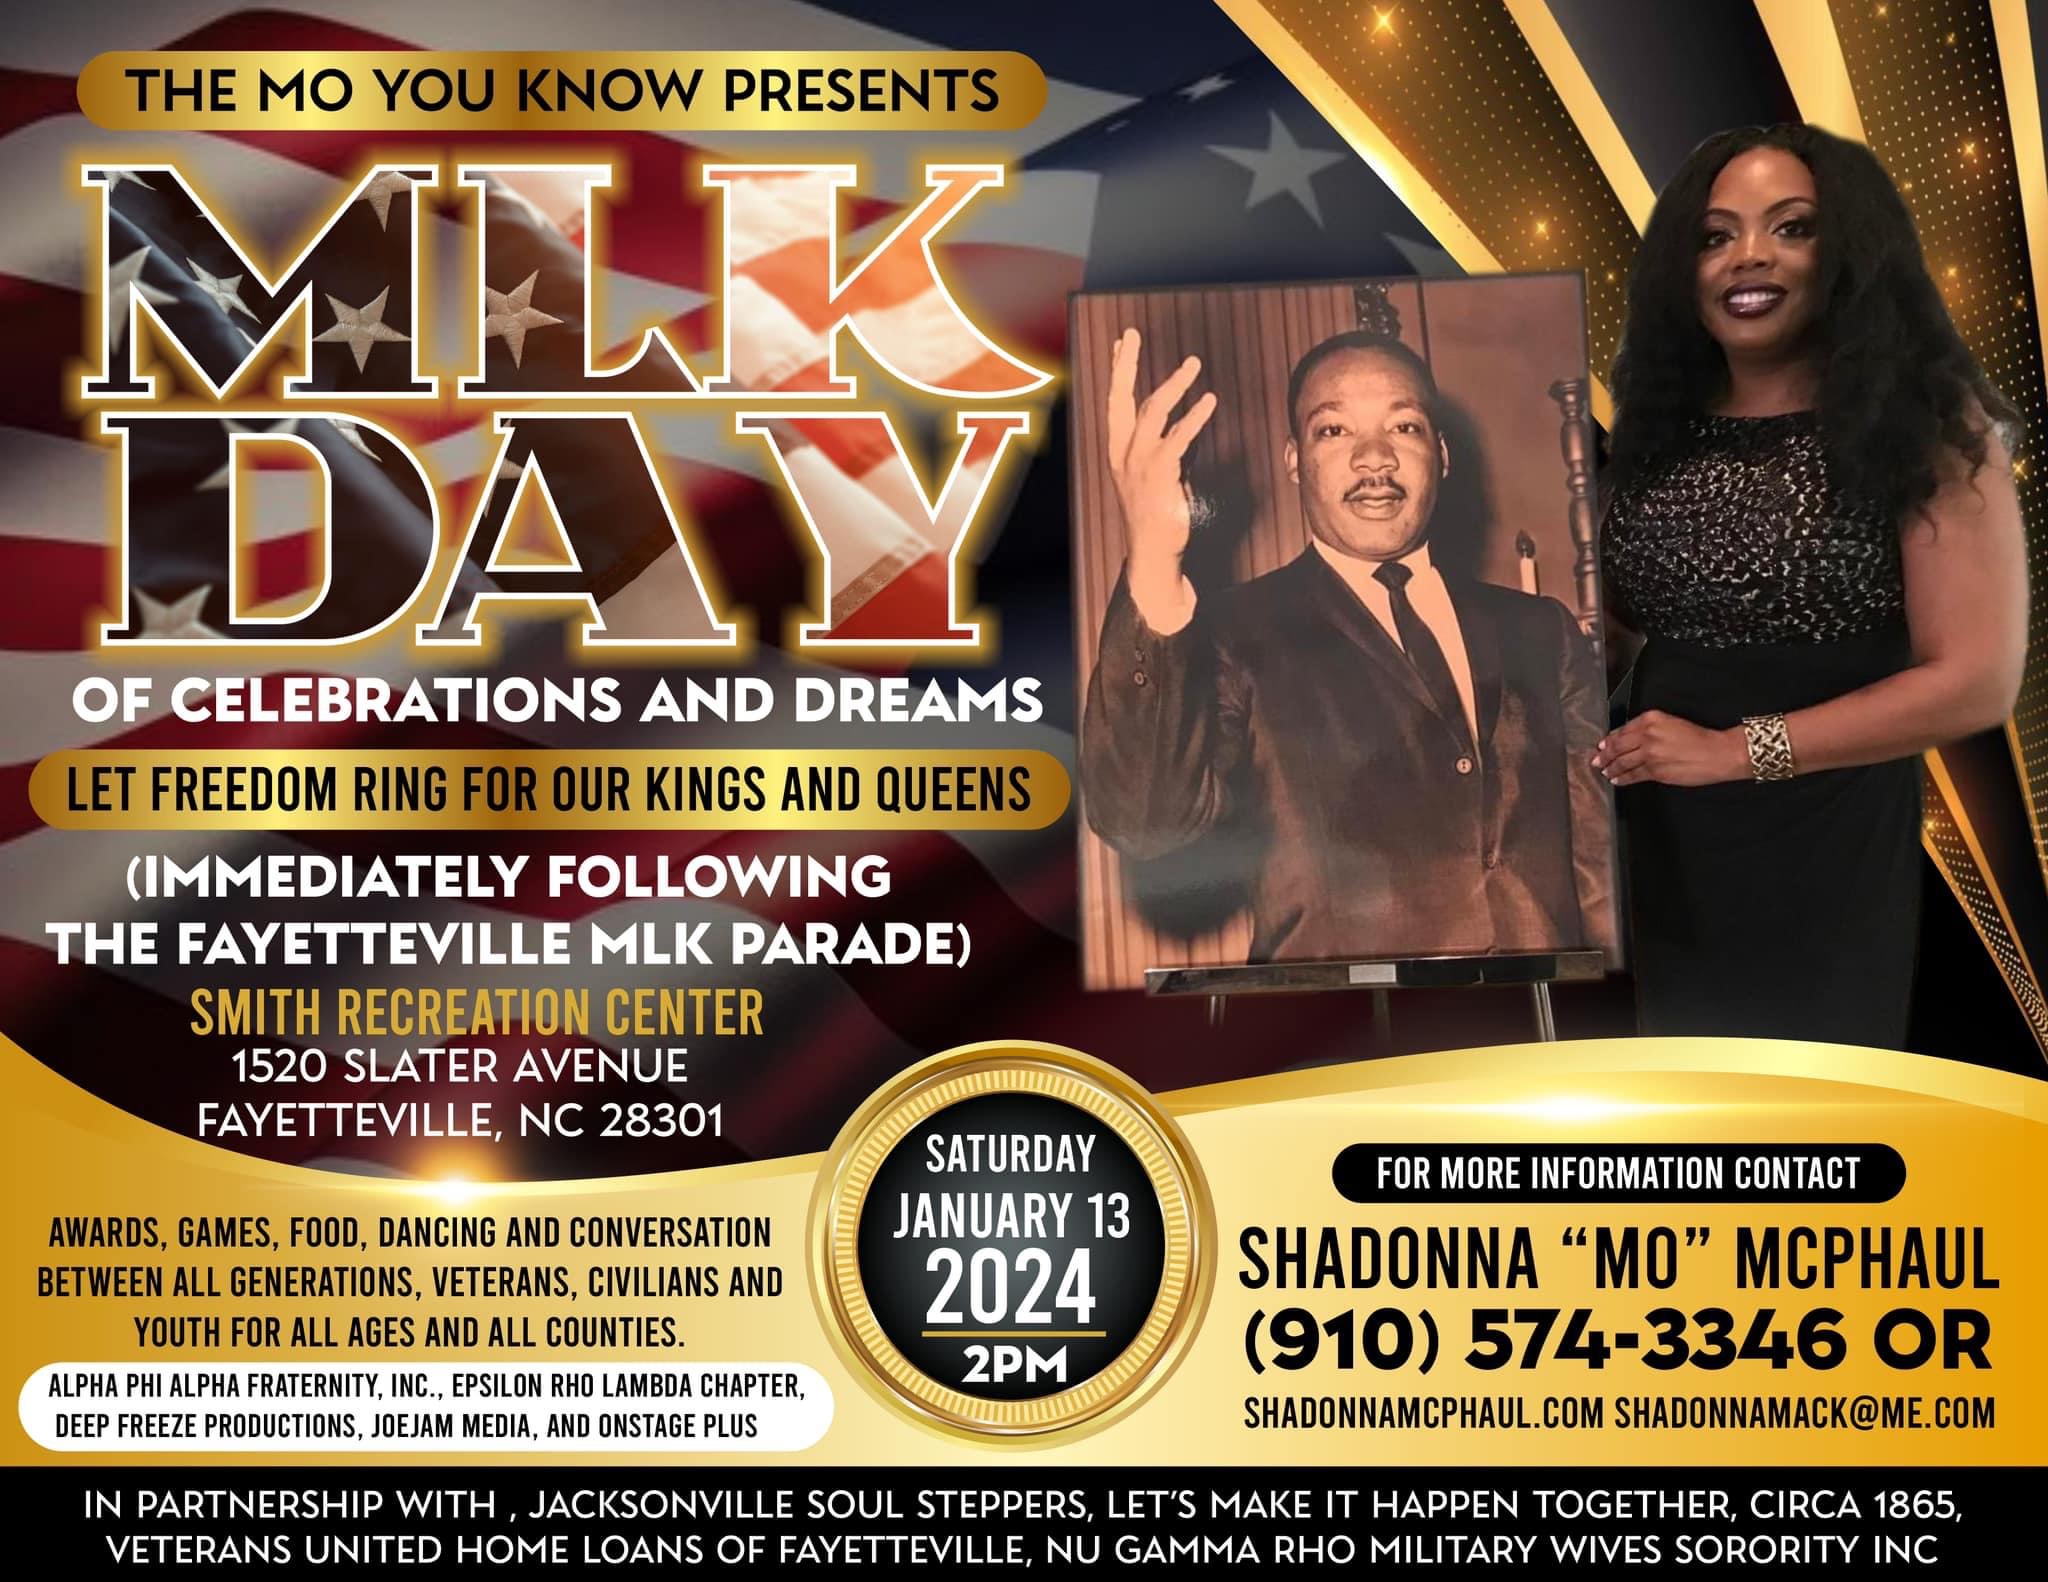 MLK Day of Celebration and Dreams: The Mo You Know Presents a Day of Unity and Commemoration